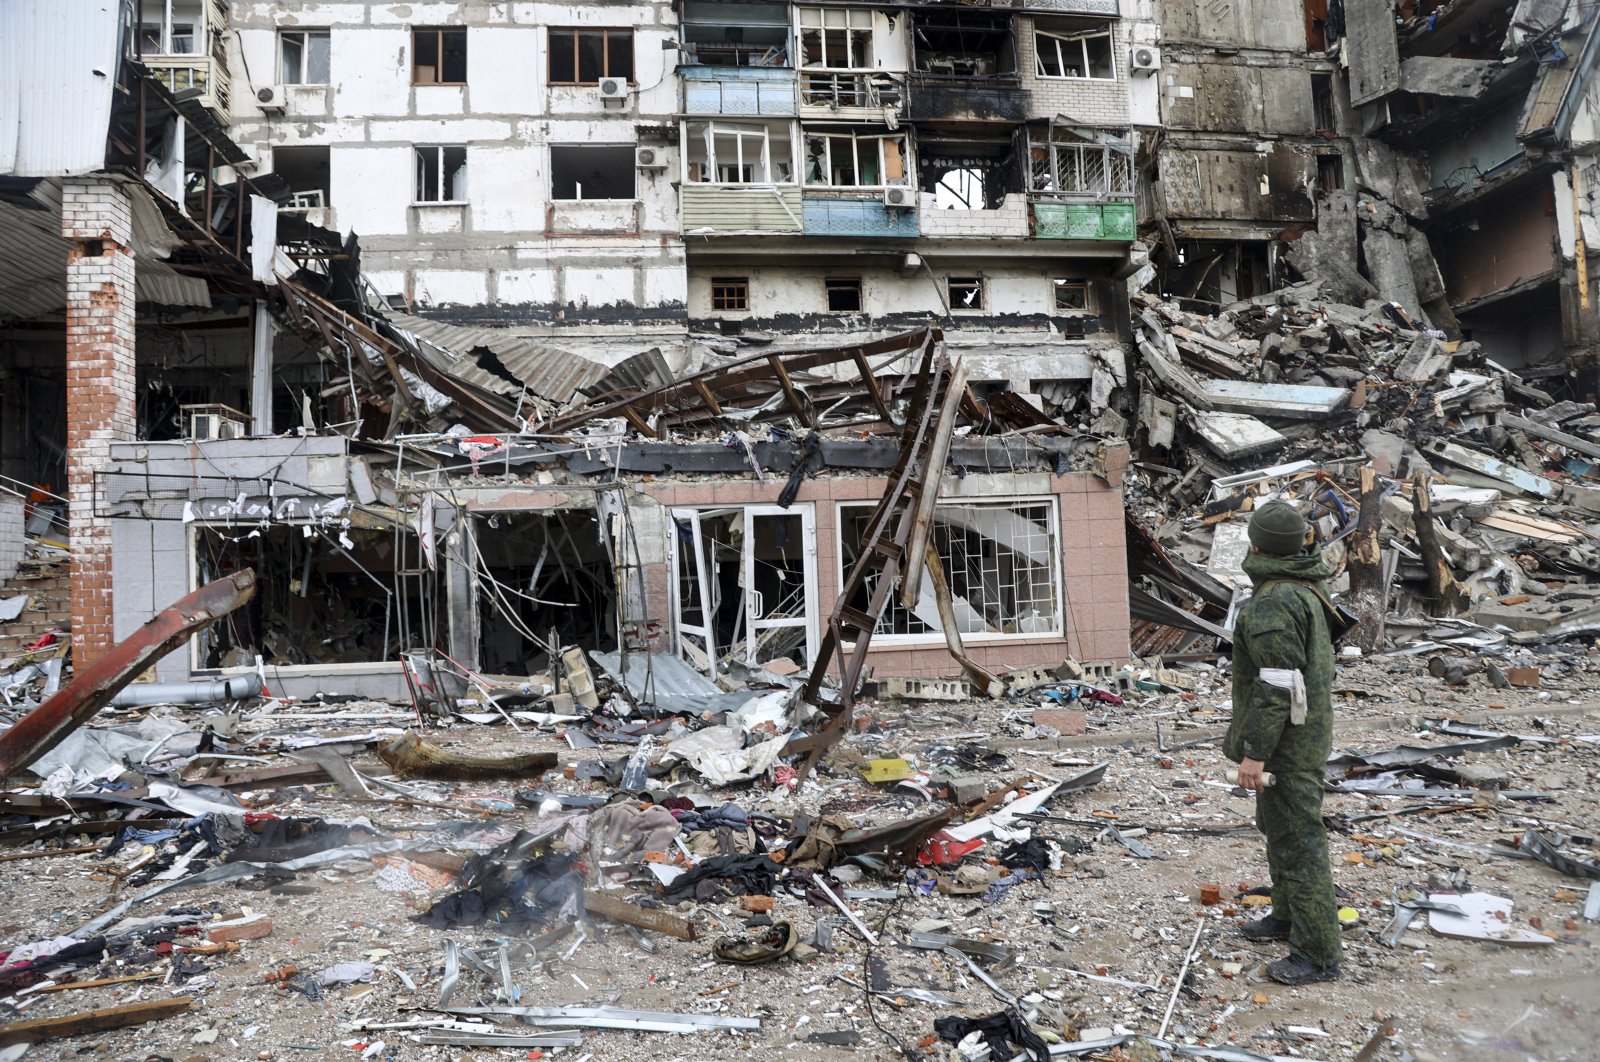 A serviceperson stands at a building damaged during fighting in Mariupol, Ukraine, April 13, 2022. (AP Photo)